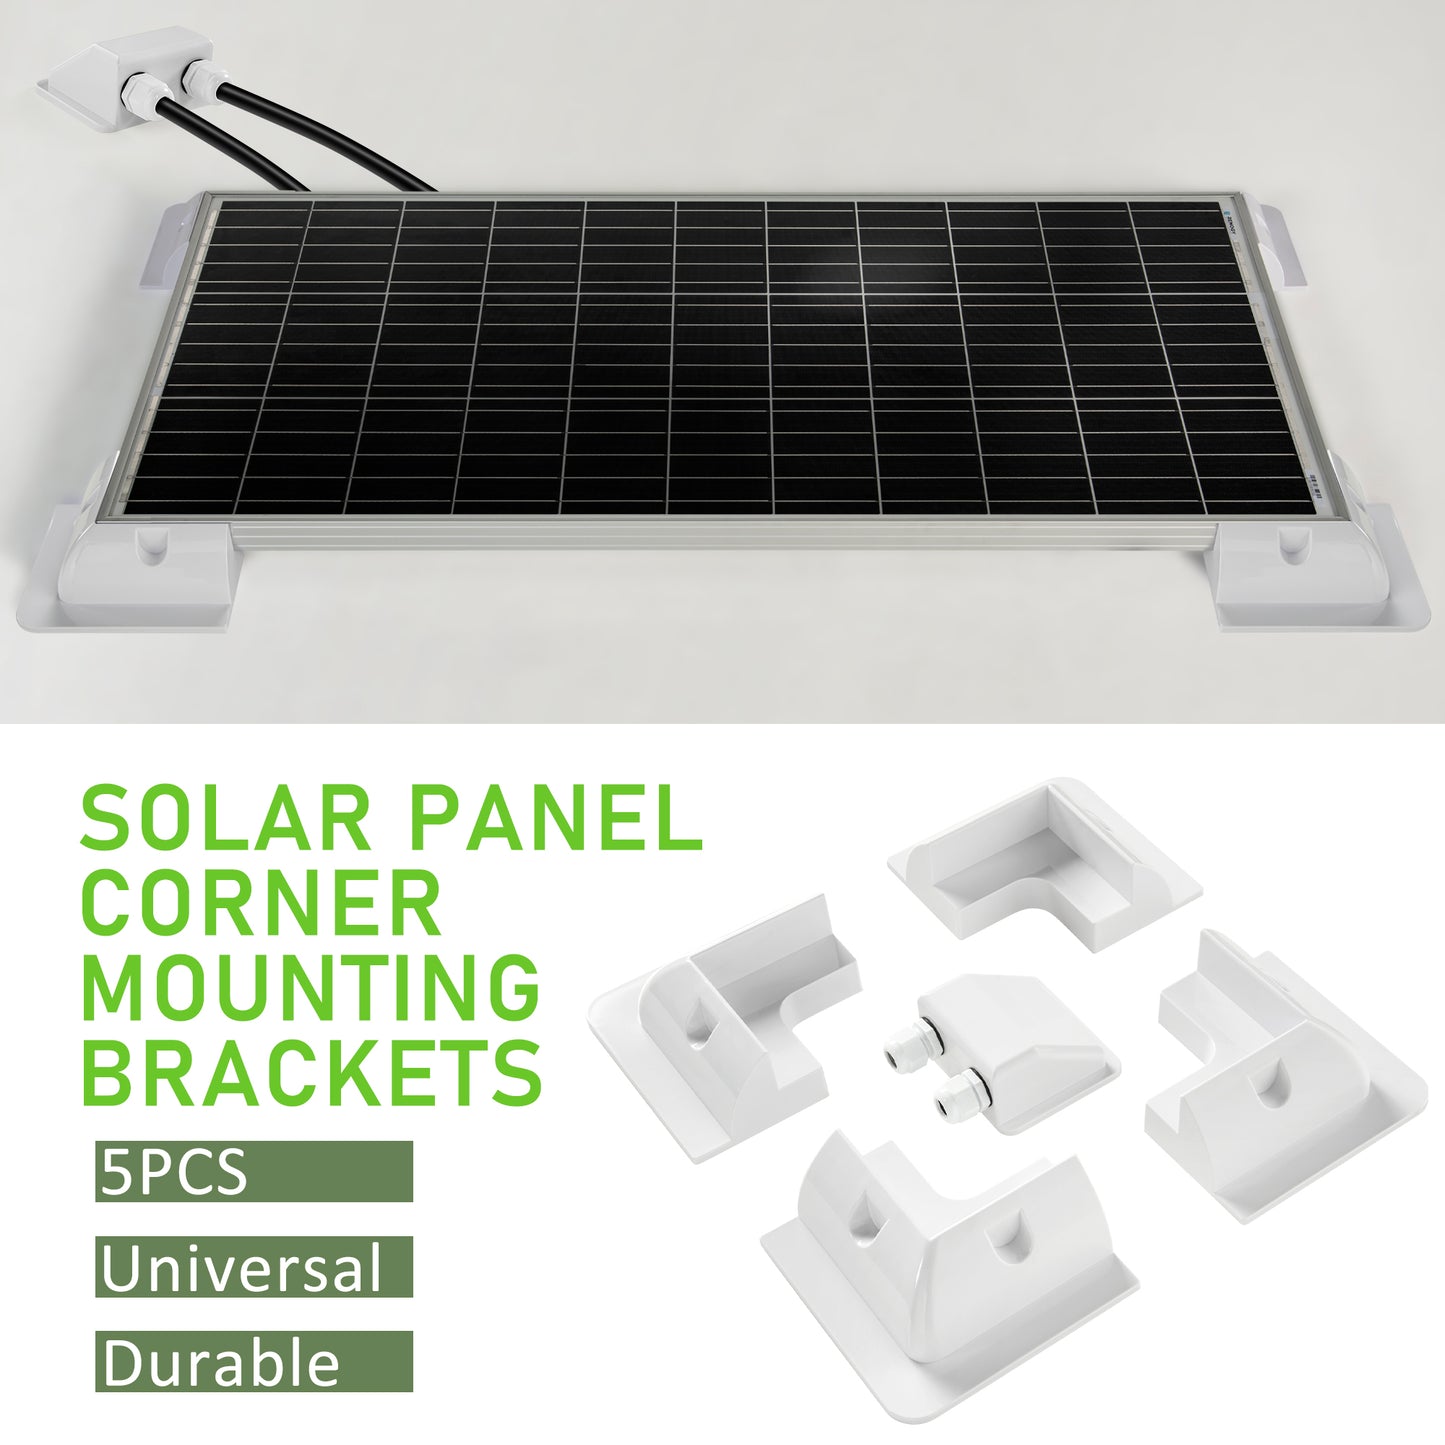 ABS Solar Panel Mounting Brackets